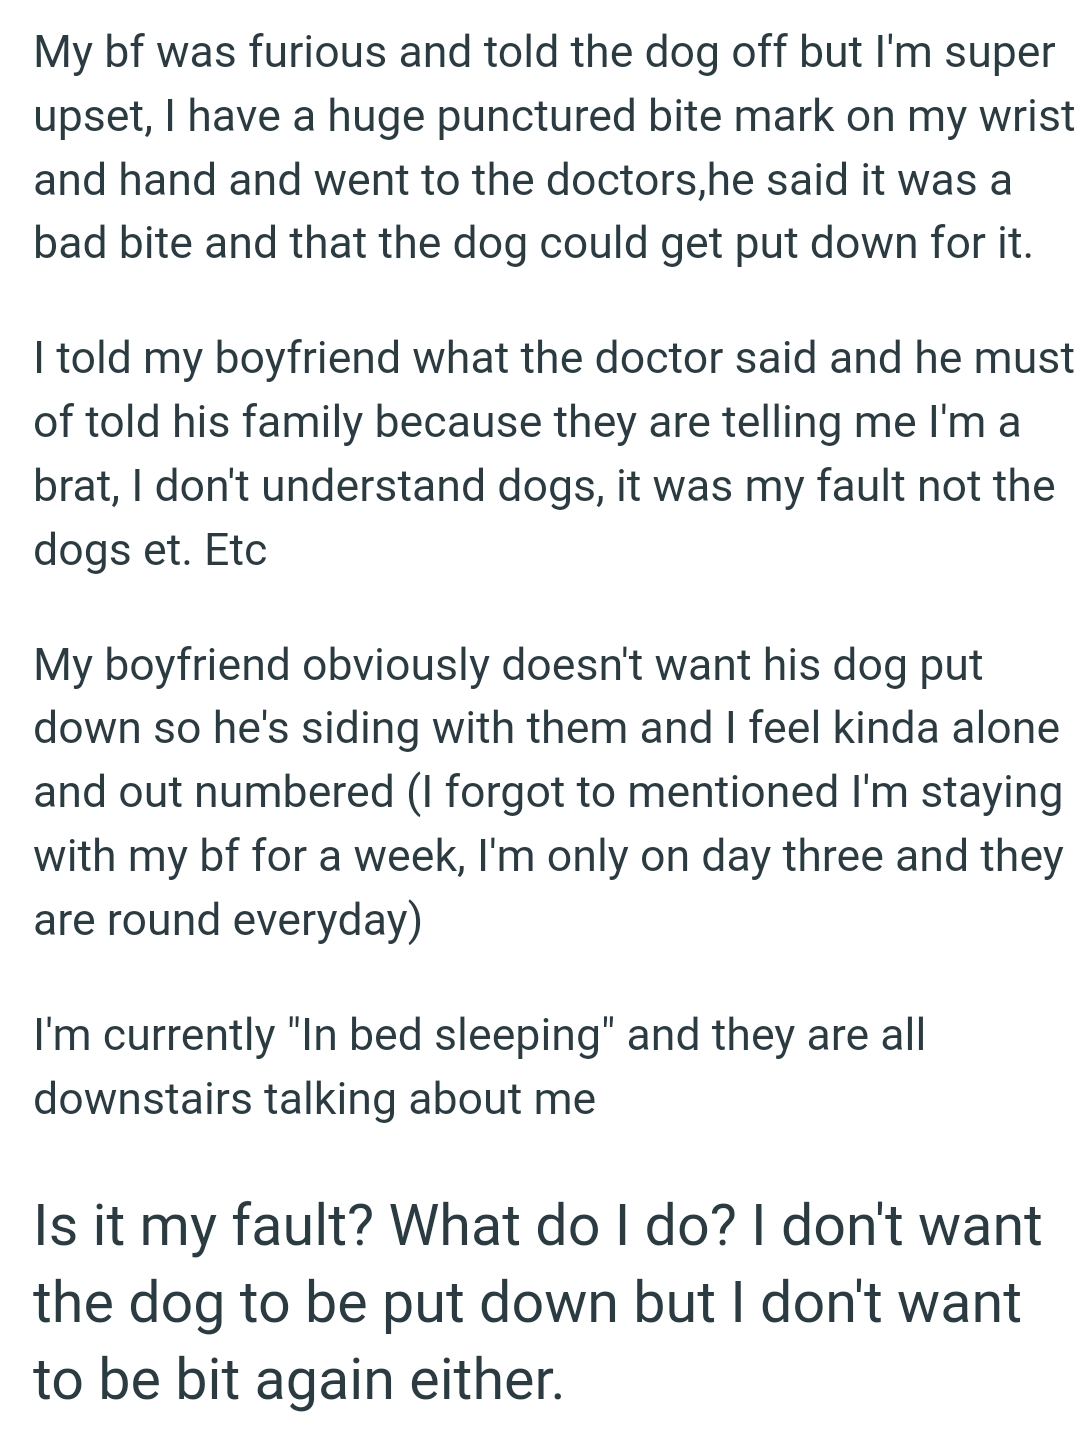 OP's boyfriend obviously doesn't want his dog put down so he's siding with them